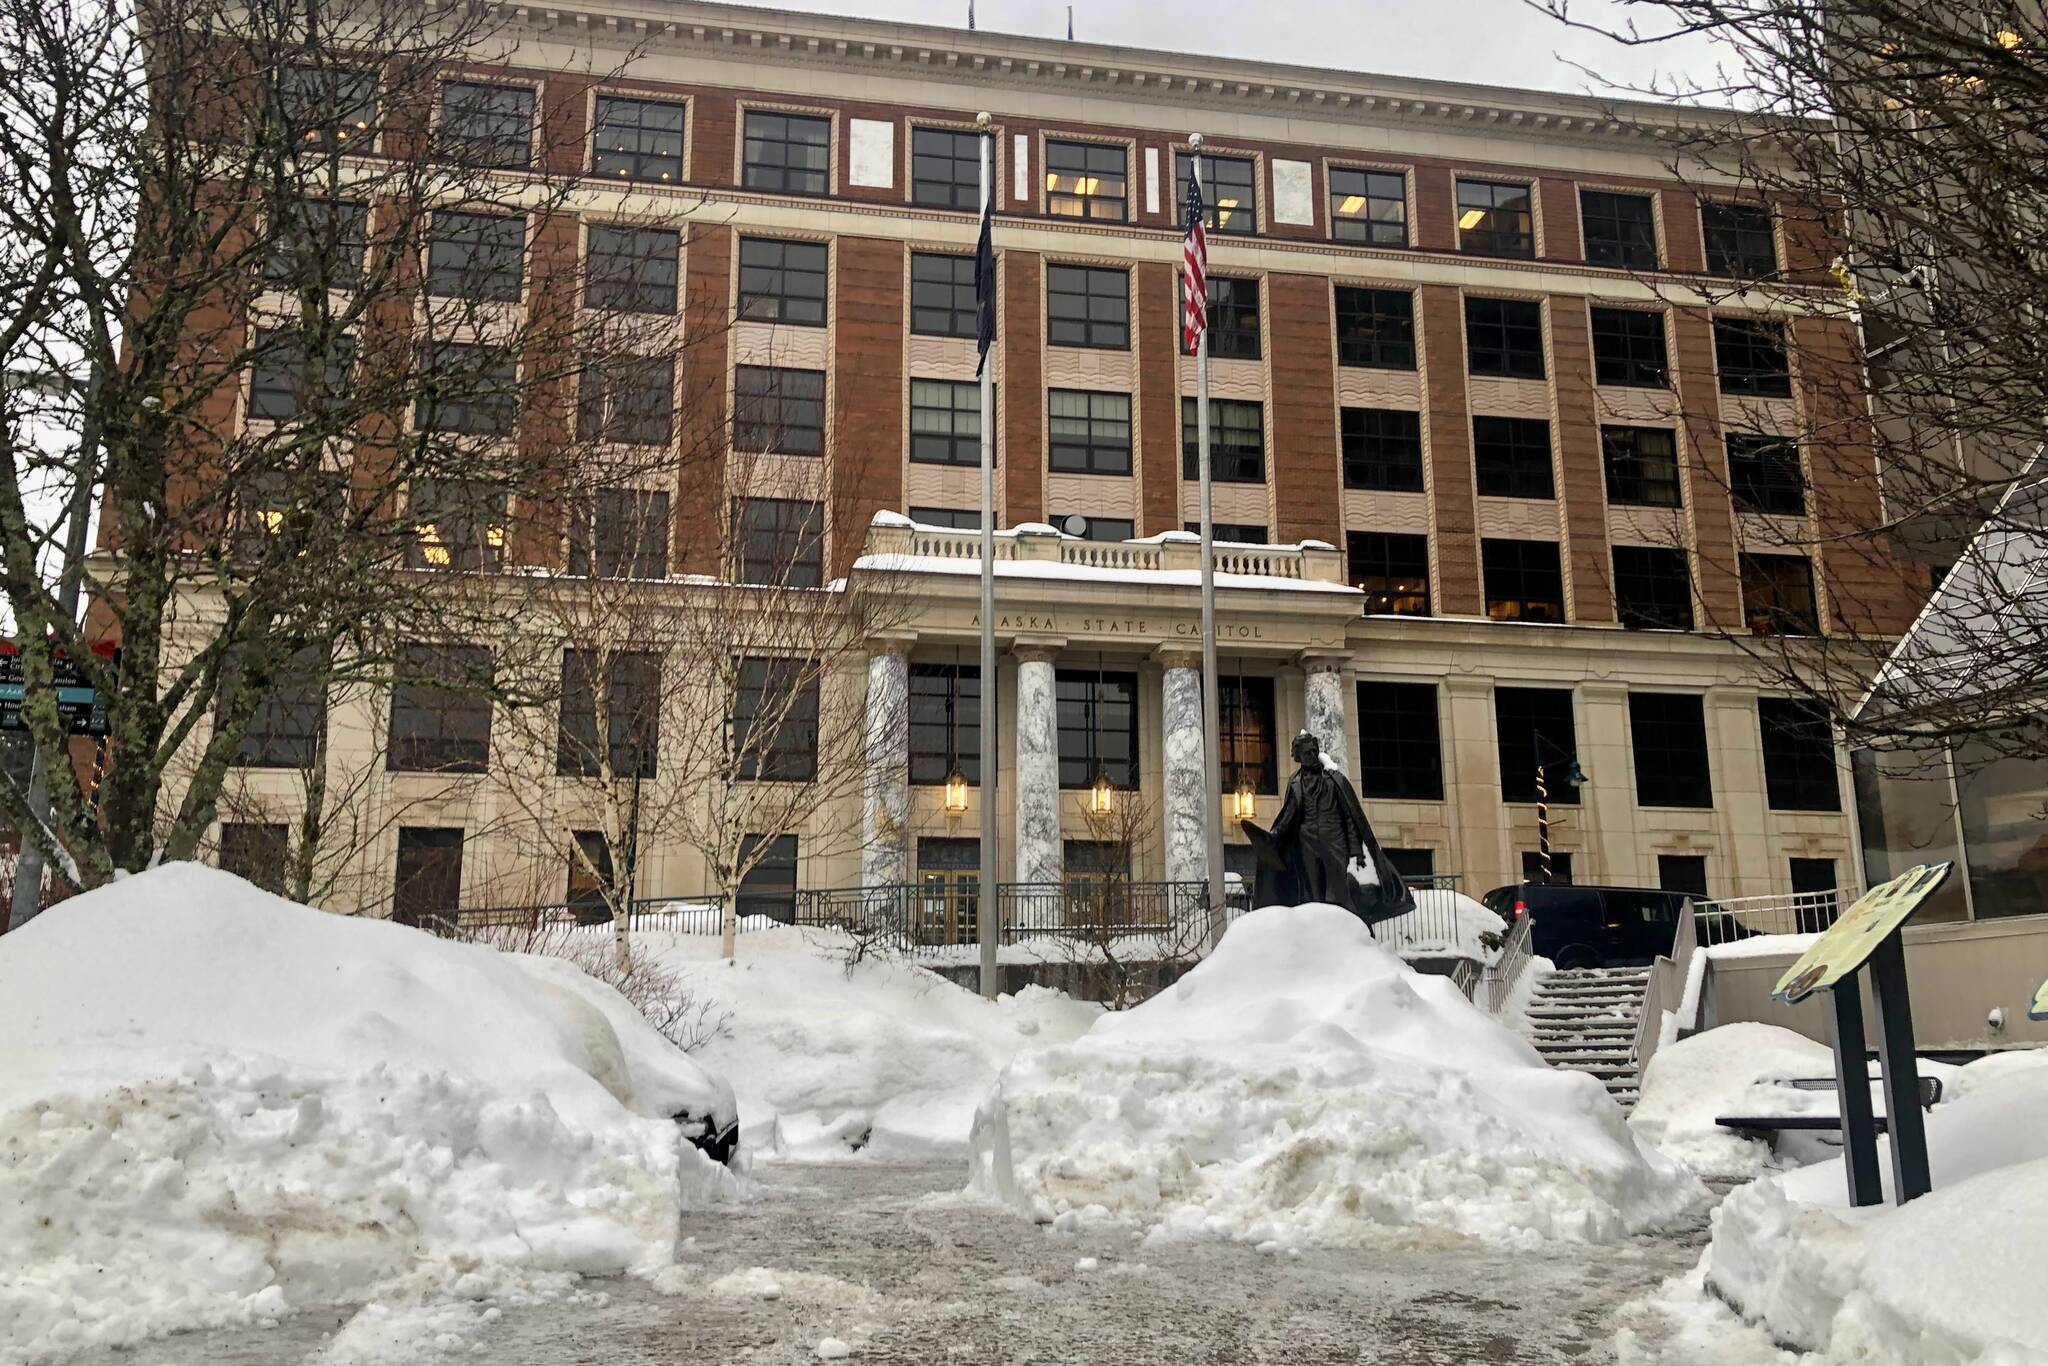 The next session of the Alaska State Legislature will begin next week at the Capitol building in Juneau, seen here on Jan. 10, 2022, and lawmakers have already filed dozens of new bills for consideration. (Peter Segall / Juneau Empire file)